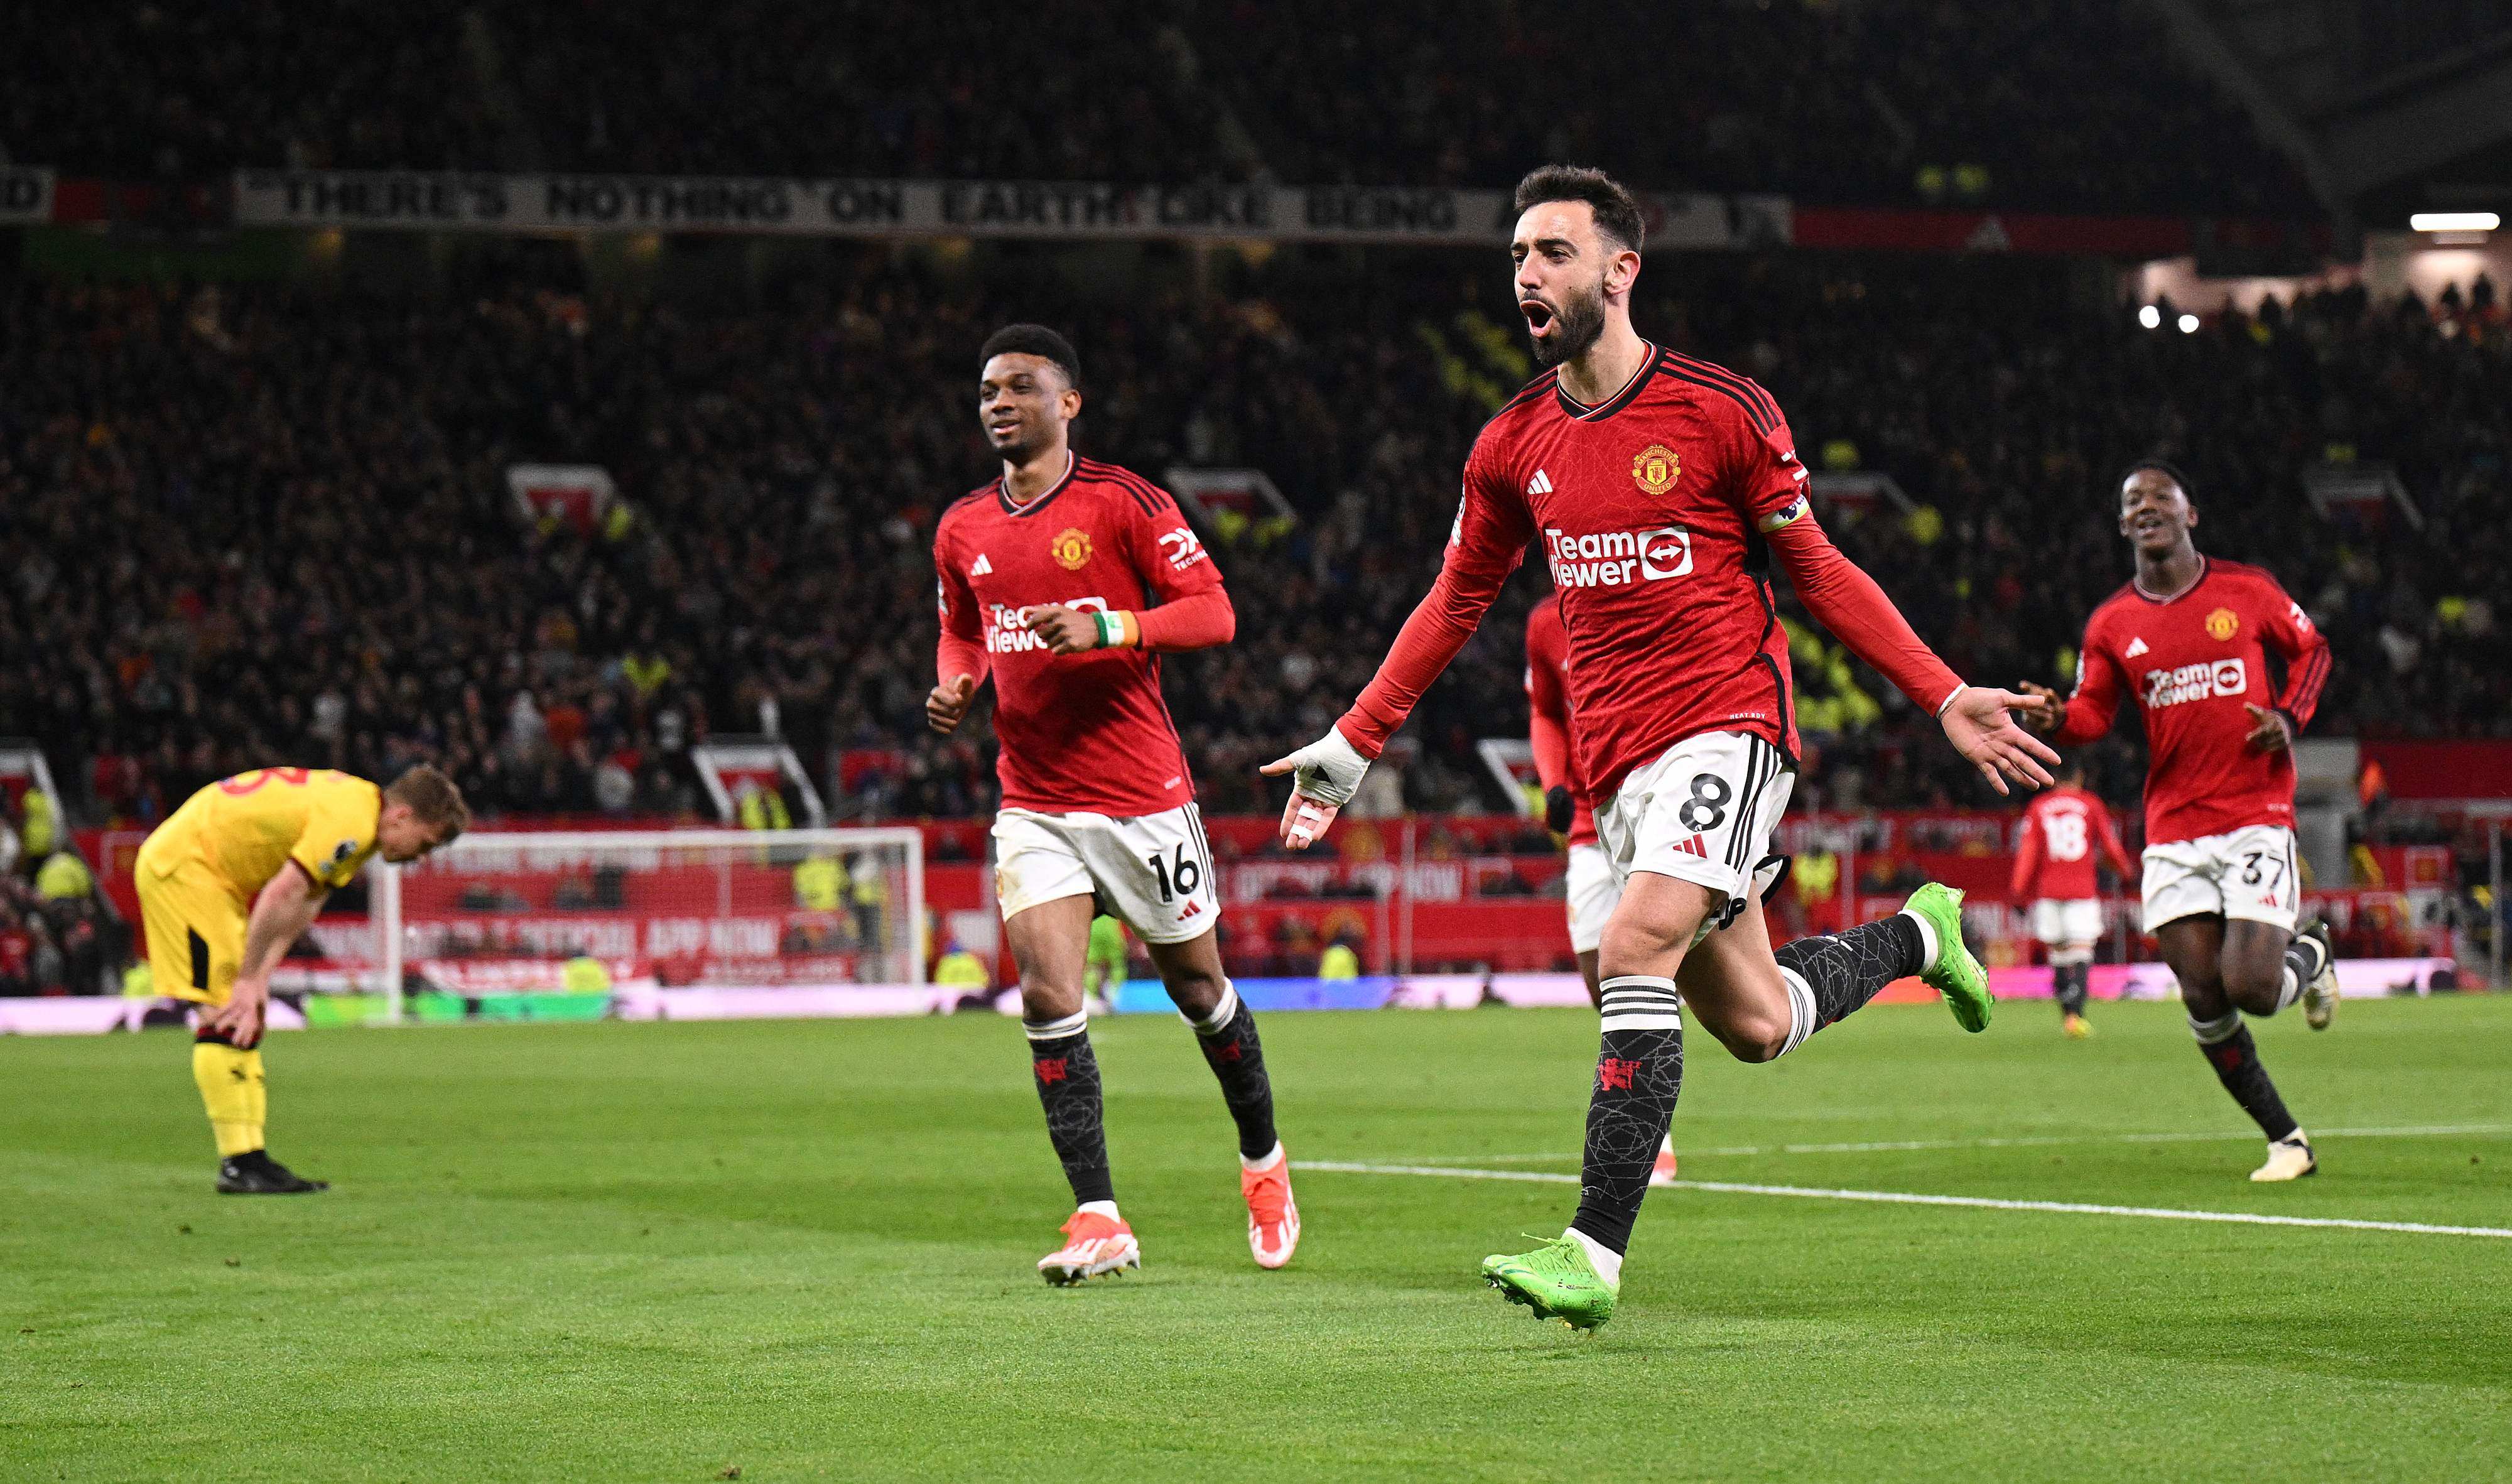 Bruno Fernandes has been in excellent recent form for Manchester United. Photo: AFP